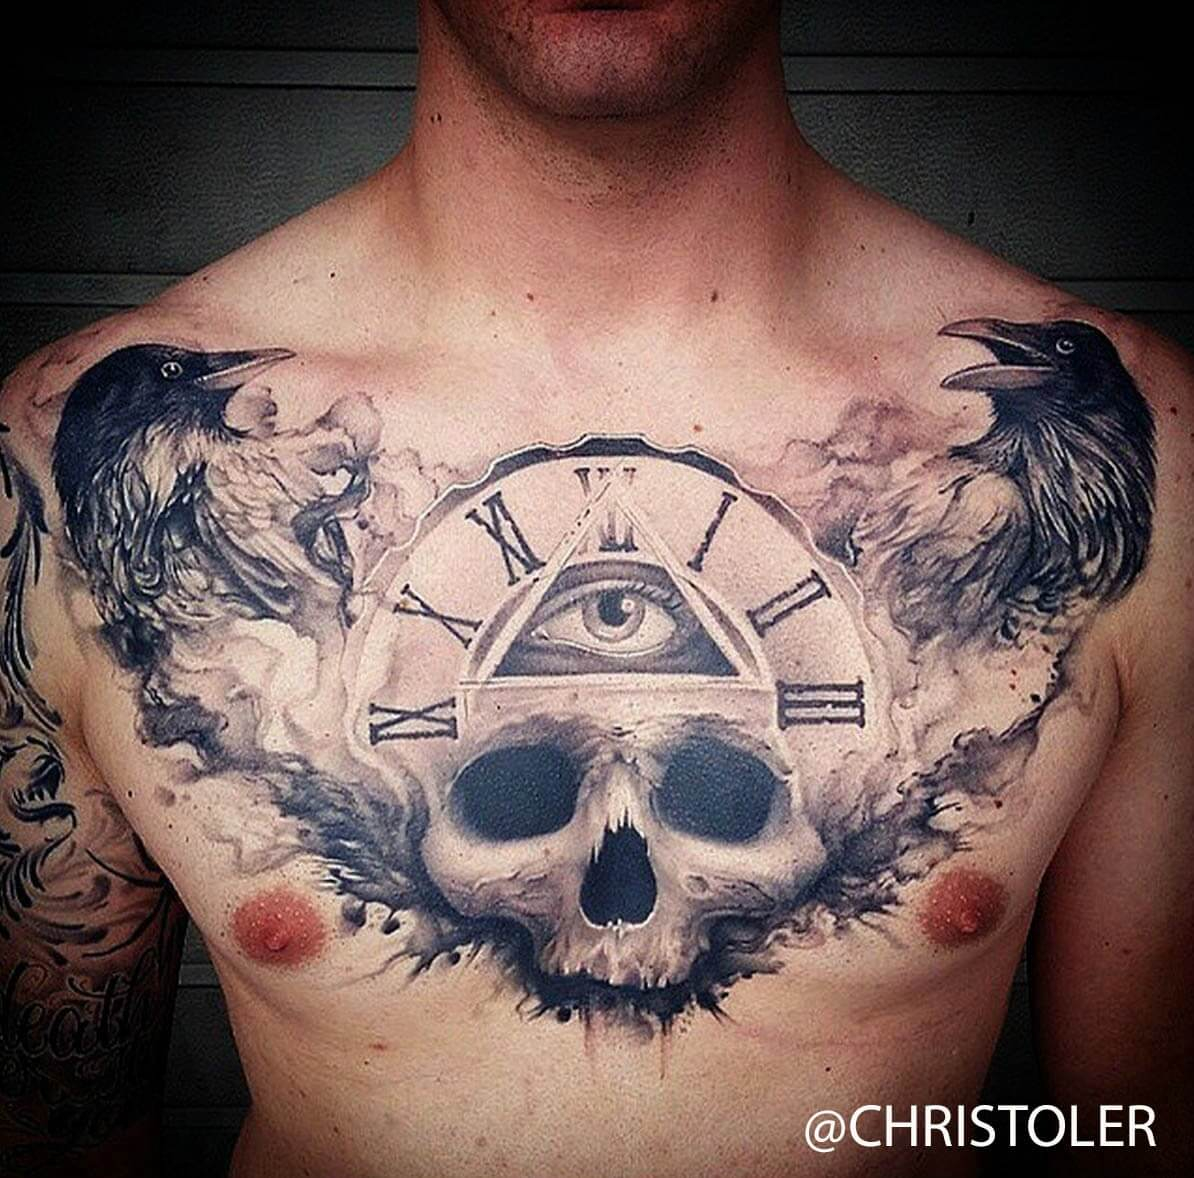 The 100 Best Chest Tattoos For Men Improb inside sizing 1194 X 1178